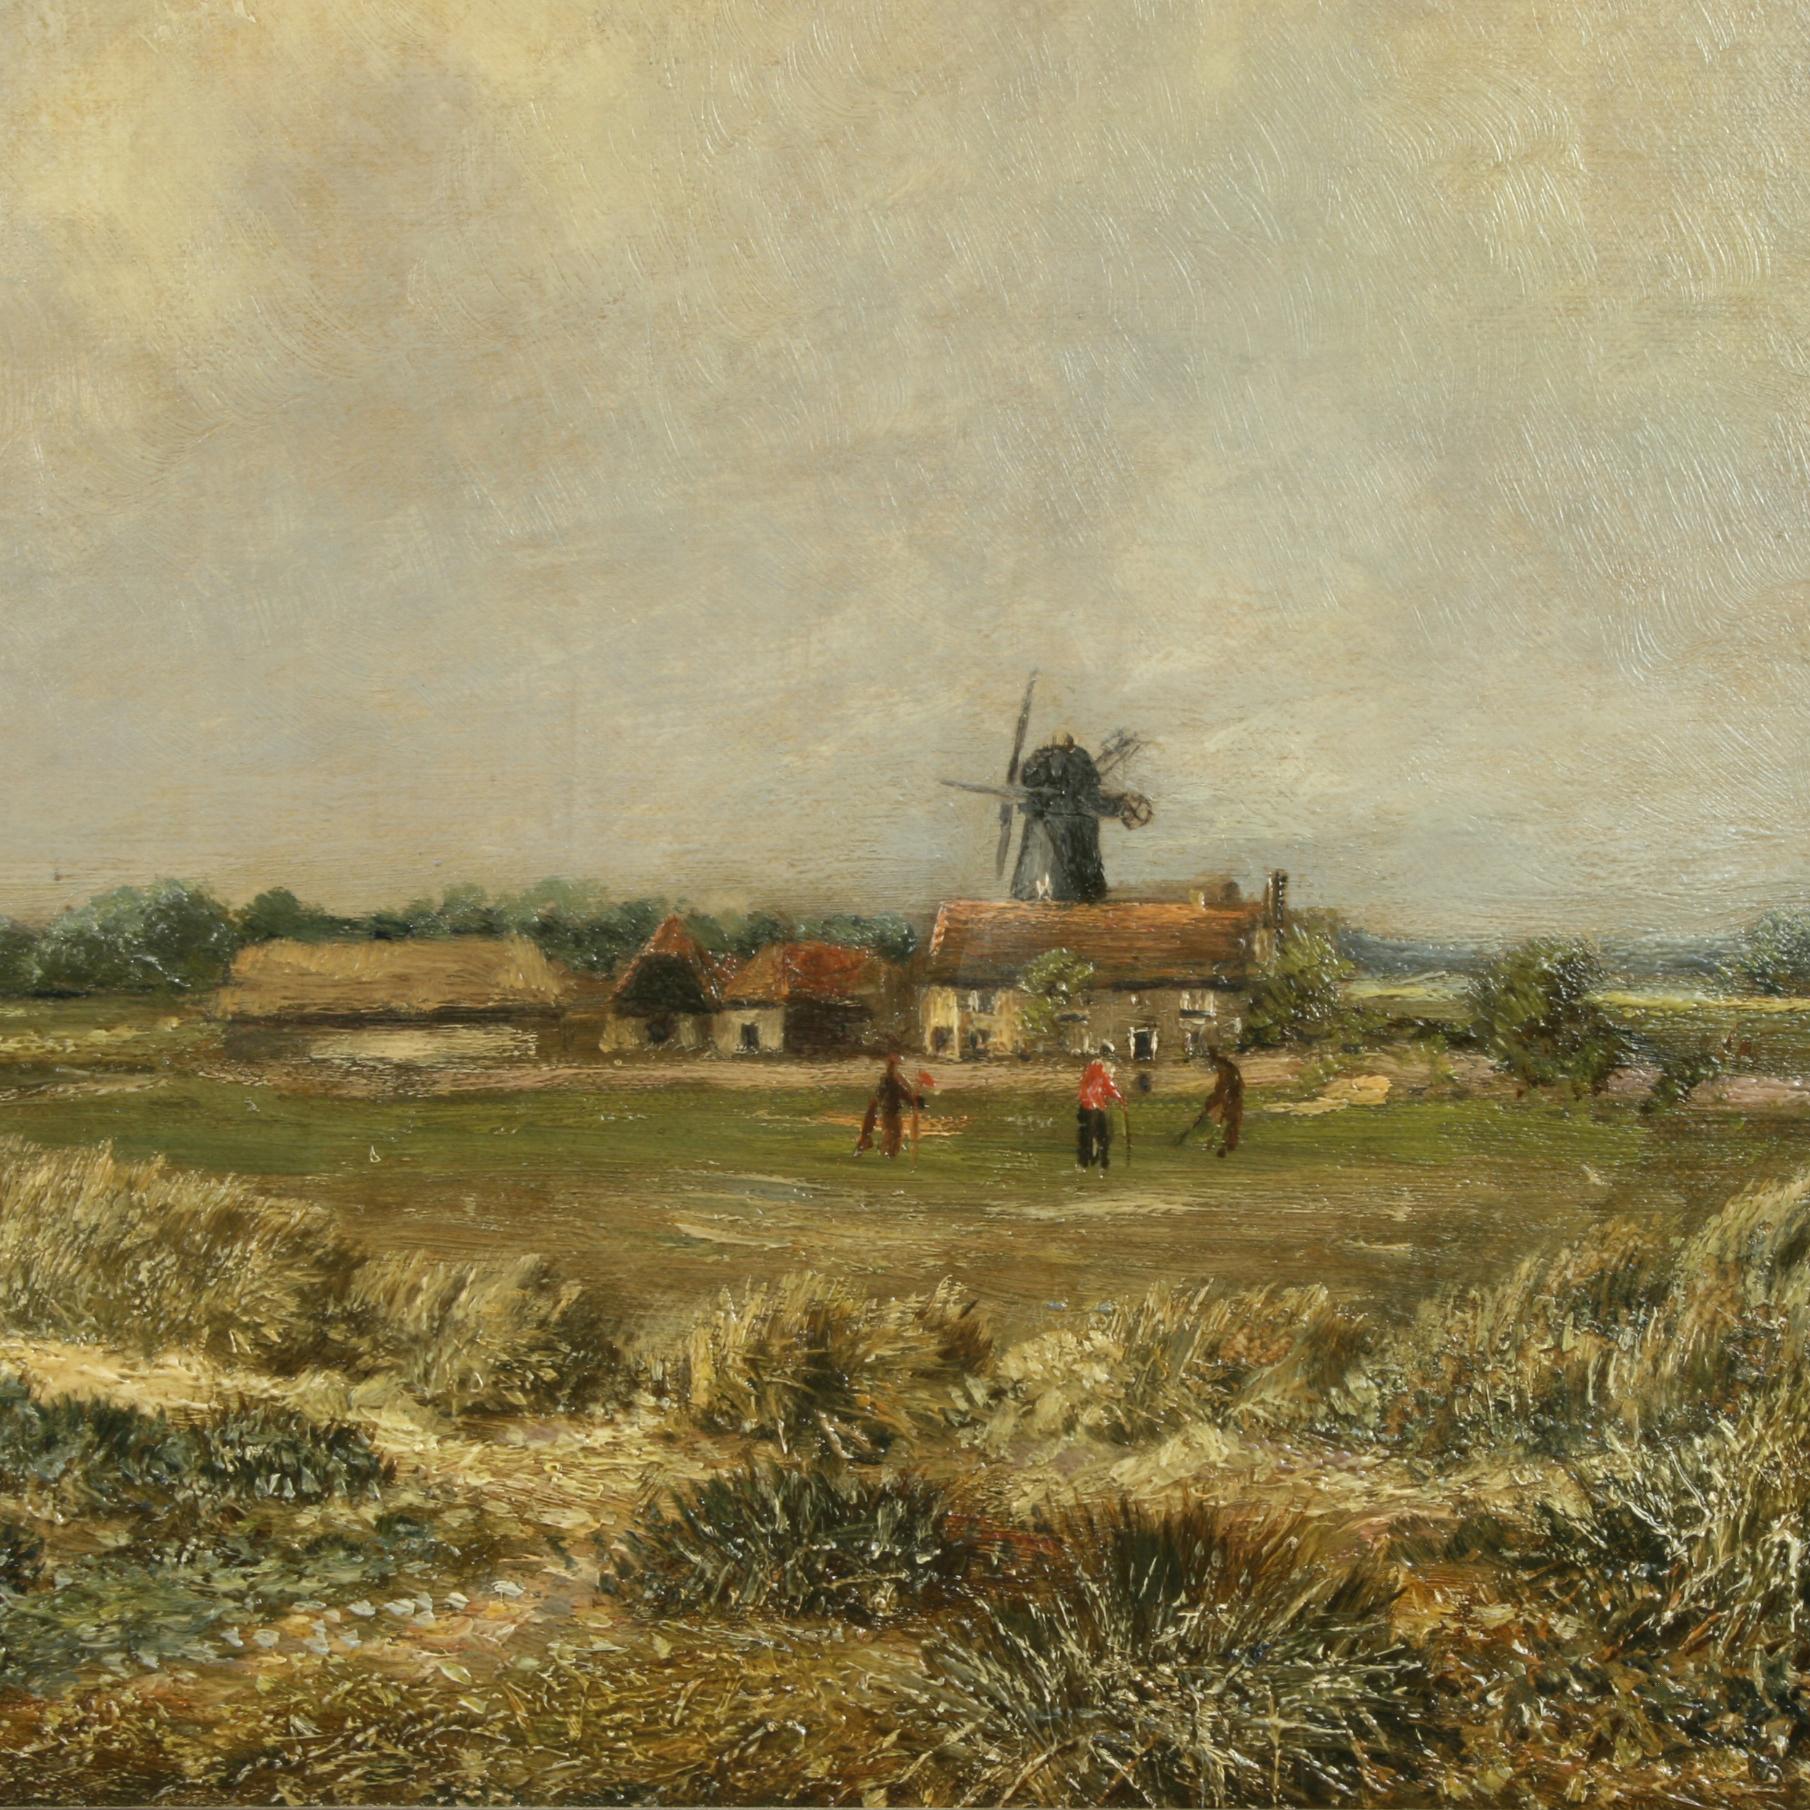 Golf painting, Wimbledon common by Edwin Harris.
A well executed painting, oil on canvas, by Edwin Harris. The painting depicts a group of golfers, a threesome putting on the green at Wimbledon common in front of the Windmill. It is signed and